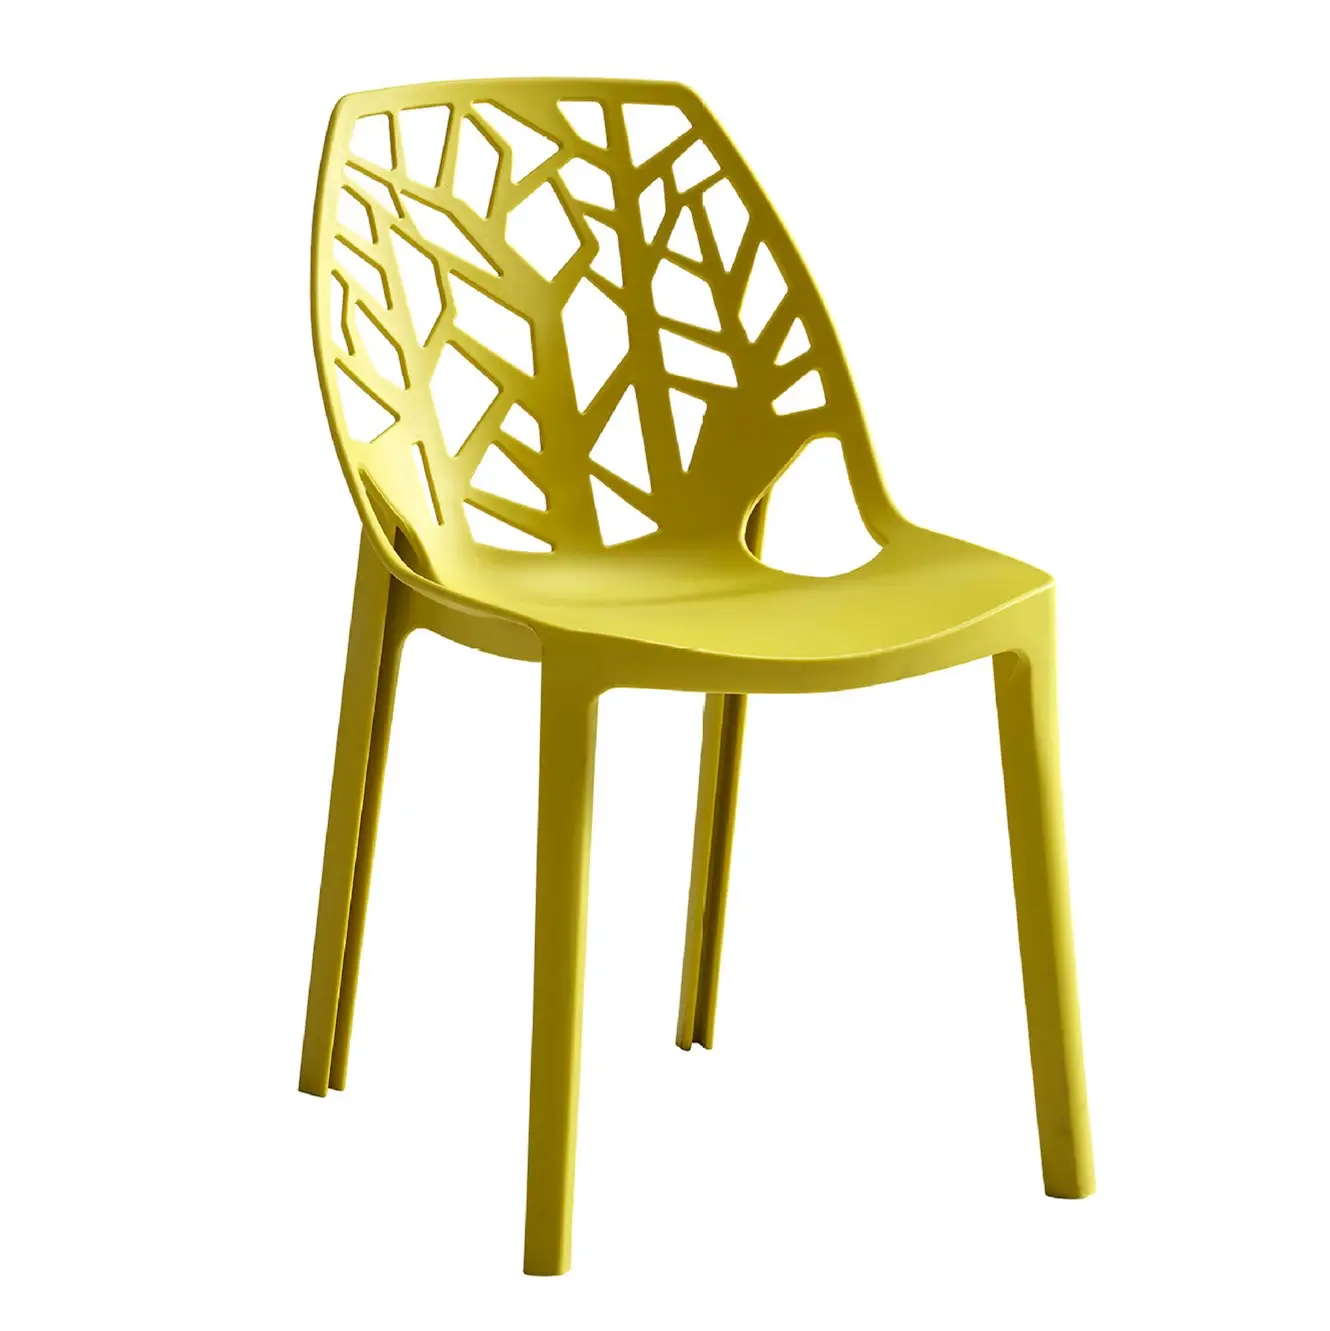 new born chair new model scandinavian home decor chairs cafe plastic hollow back armless modern chair plastic